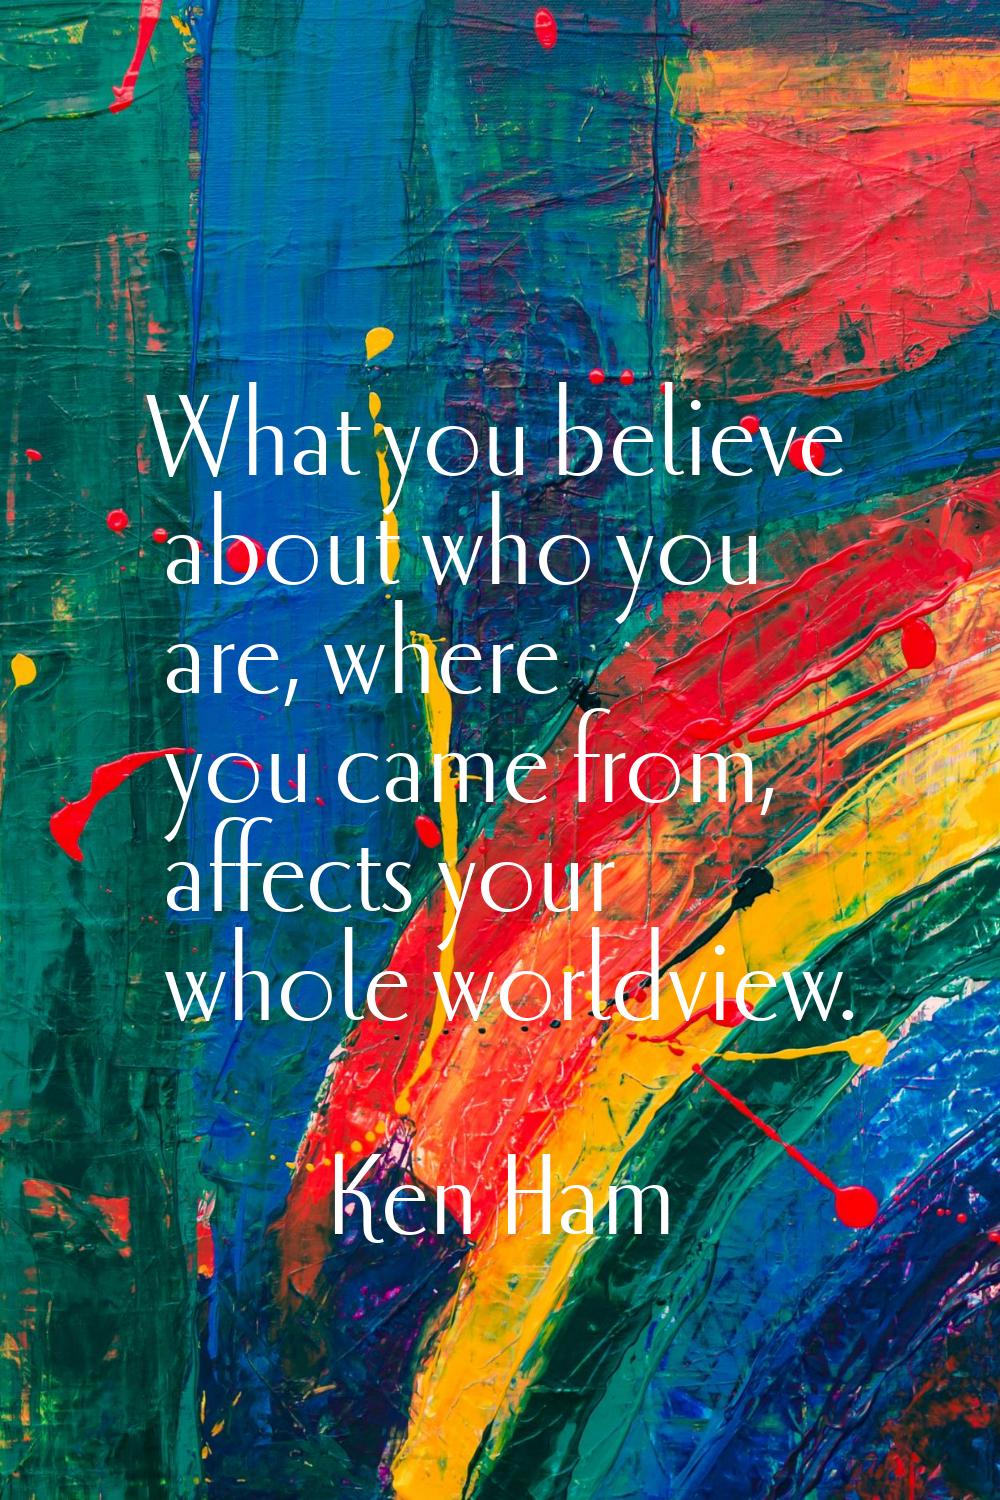 What you believe about who you are, where you came from, affects your whole worldview.